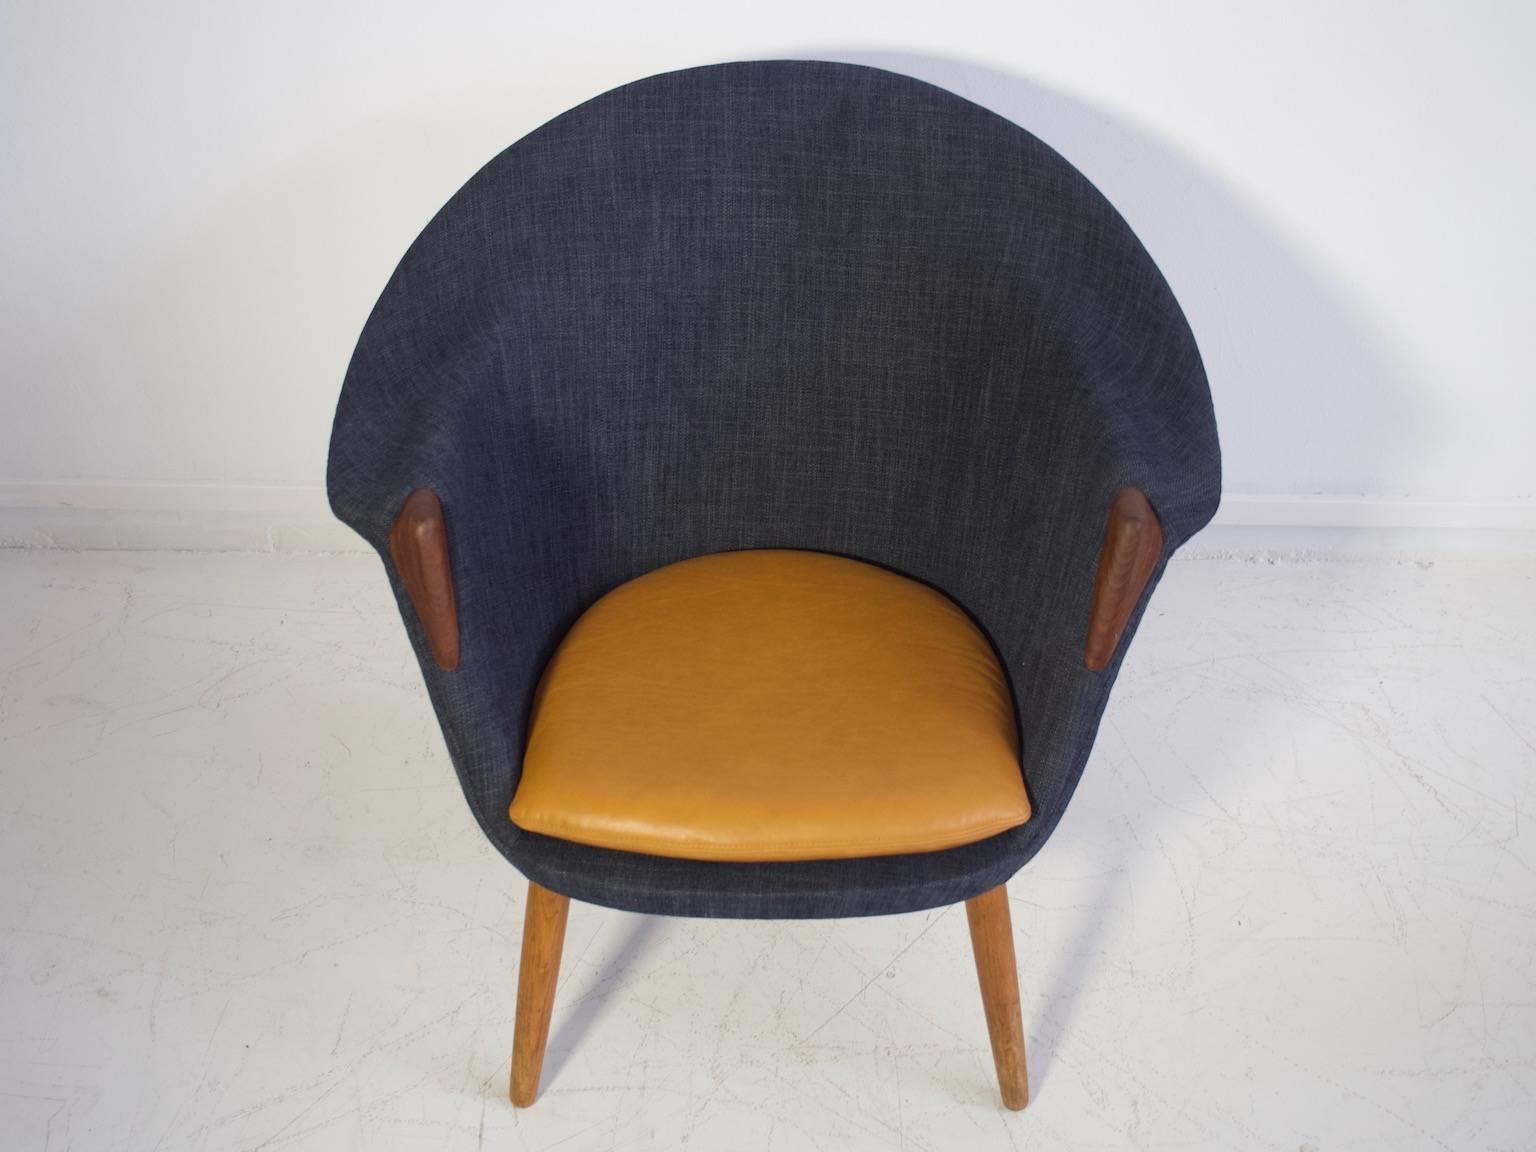 Mid-Century Modern Lounge Chair Upholstered with Dark Blue Fabric and Cognac Leather on Oak Legs